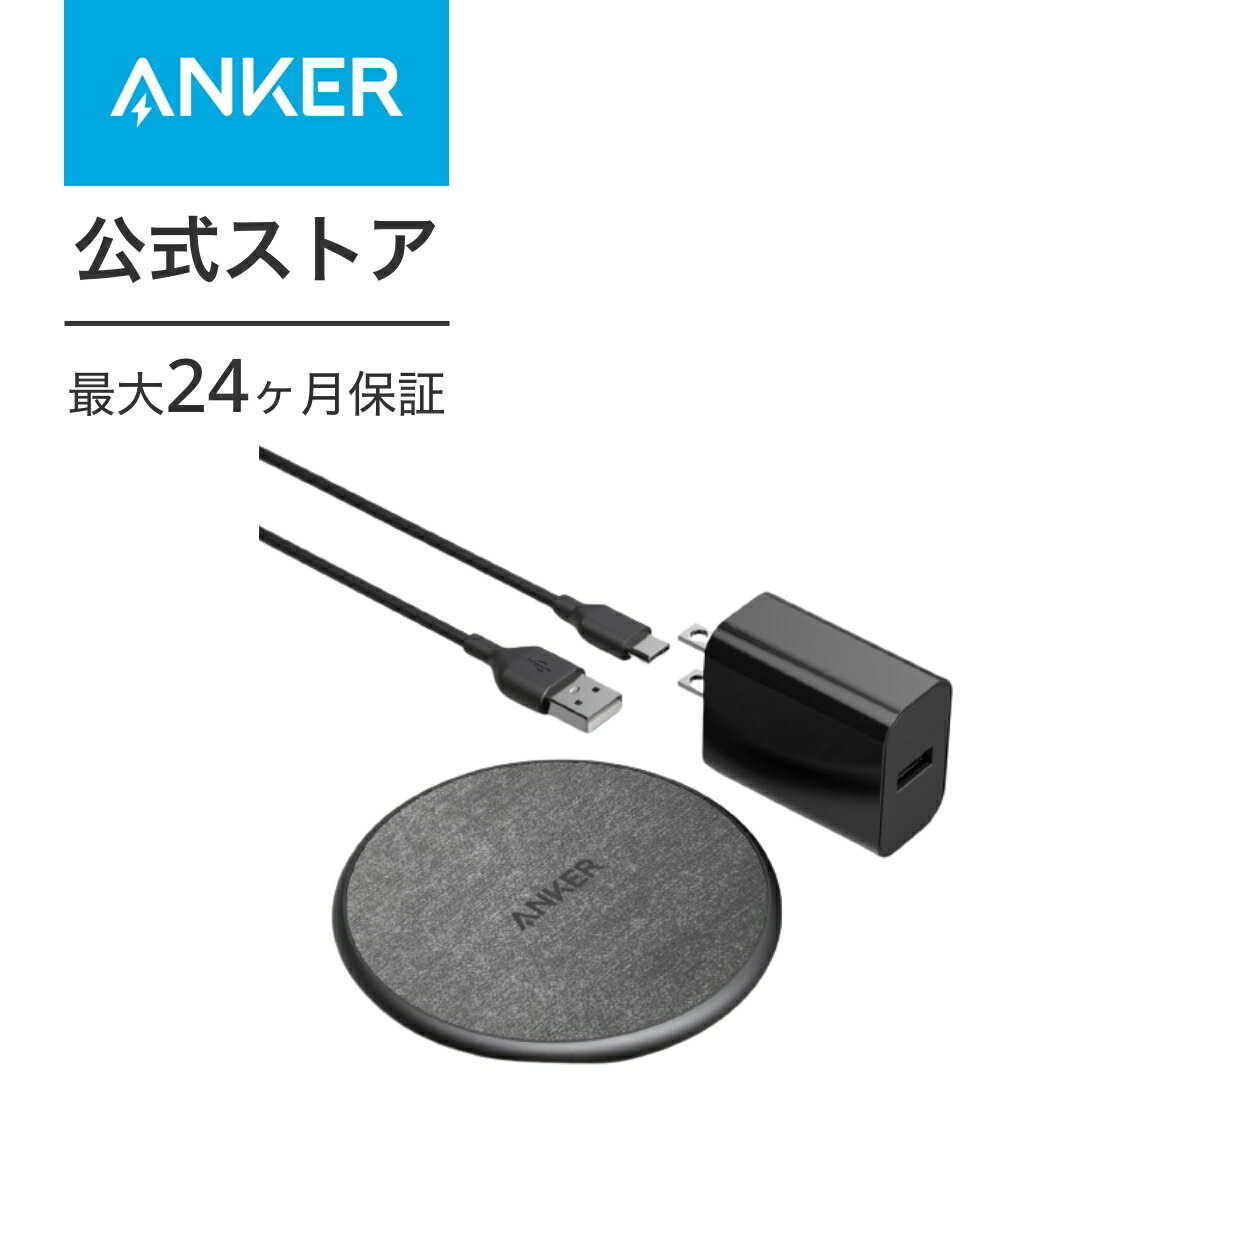 Anker 318 Wireless Charger (Pad) (ワイヤレス充電器 Qi認証) iPhone 14/ 13 Galaxy 各種対応 最大10W出力 USB-C & USB-A ケーブル同梱 type-c入力対応